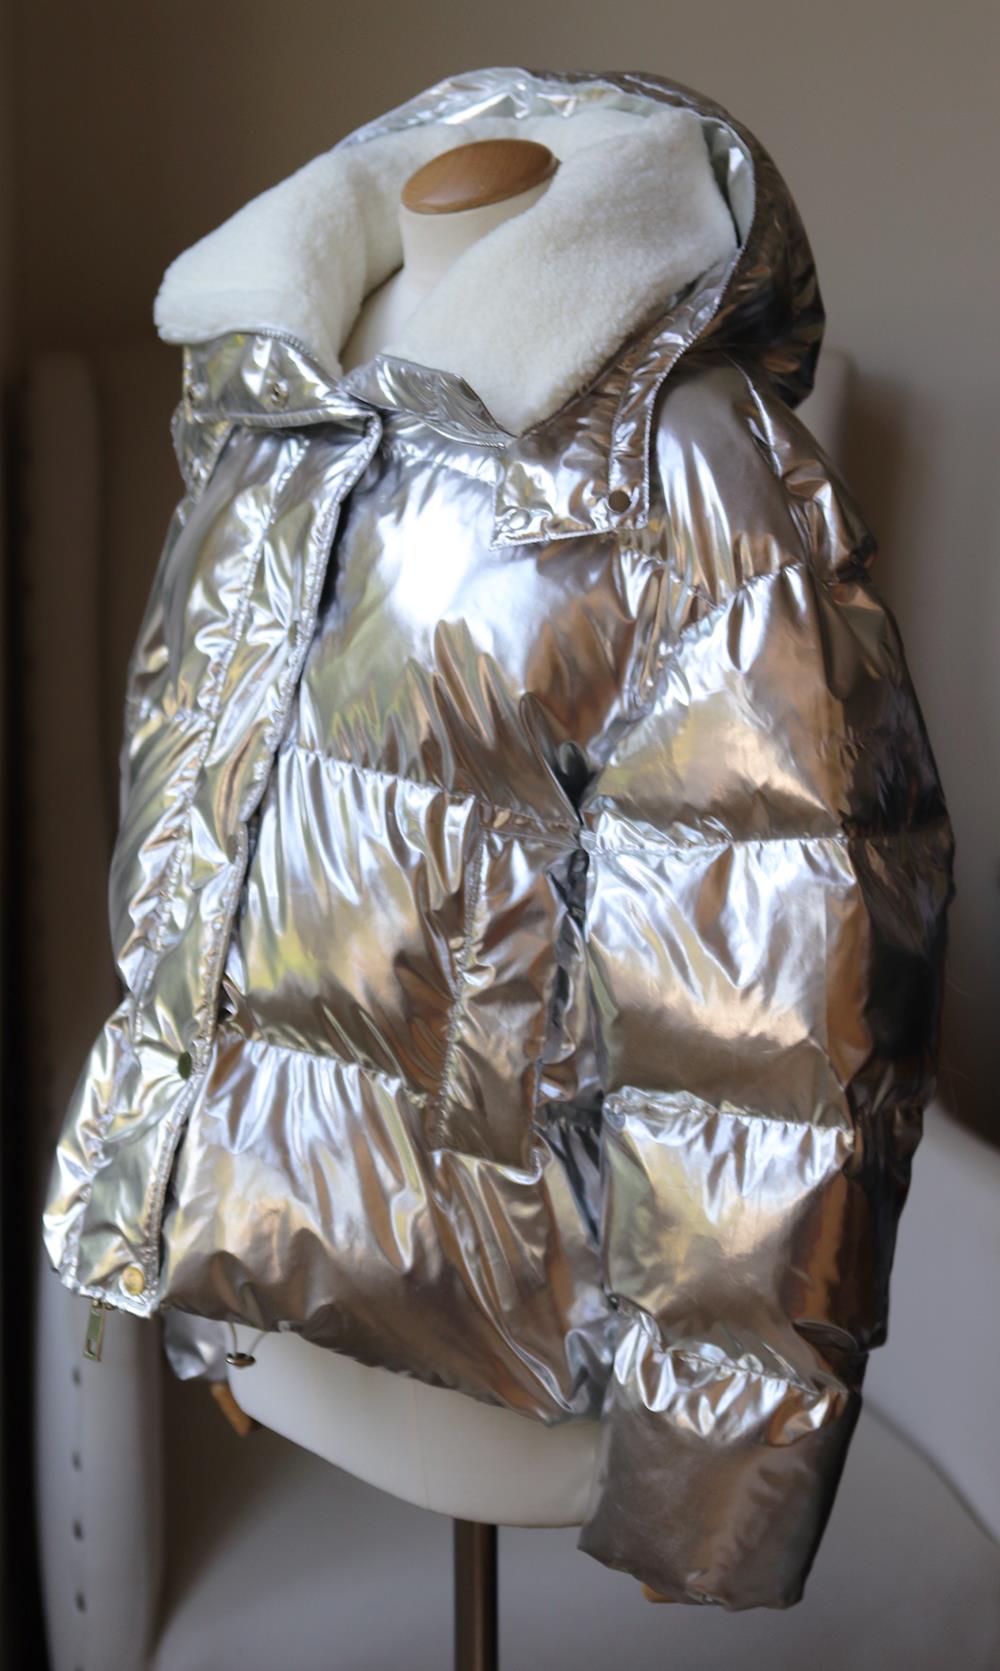 P.A.R.O.S.H. METALLIC SHELL PADDED JACKET LARGE